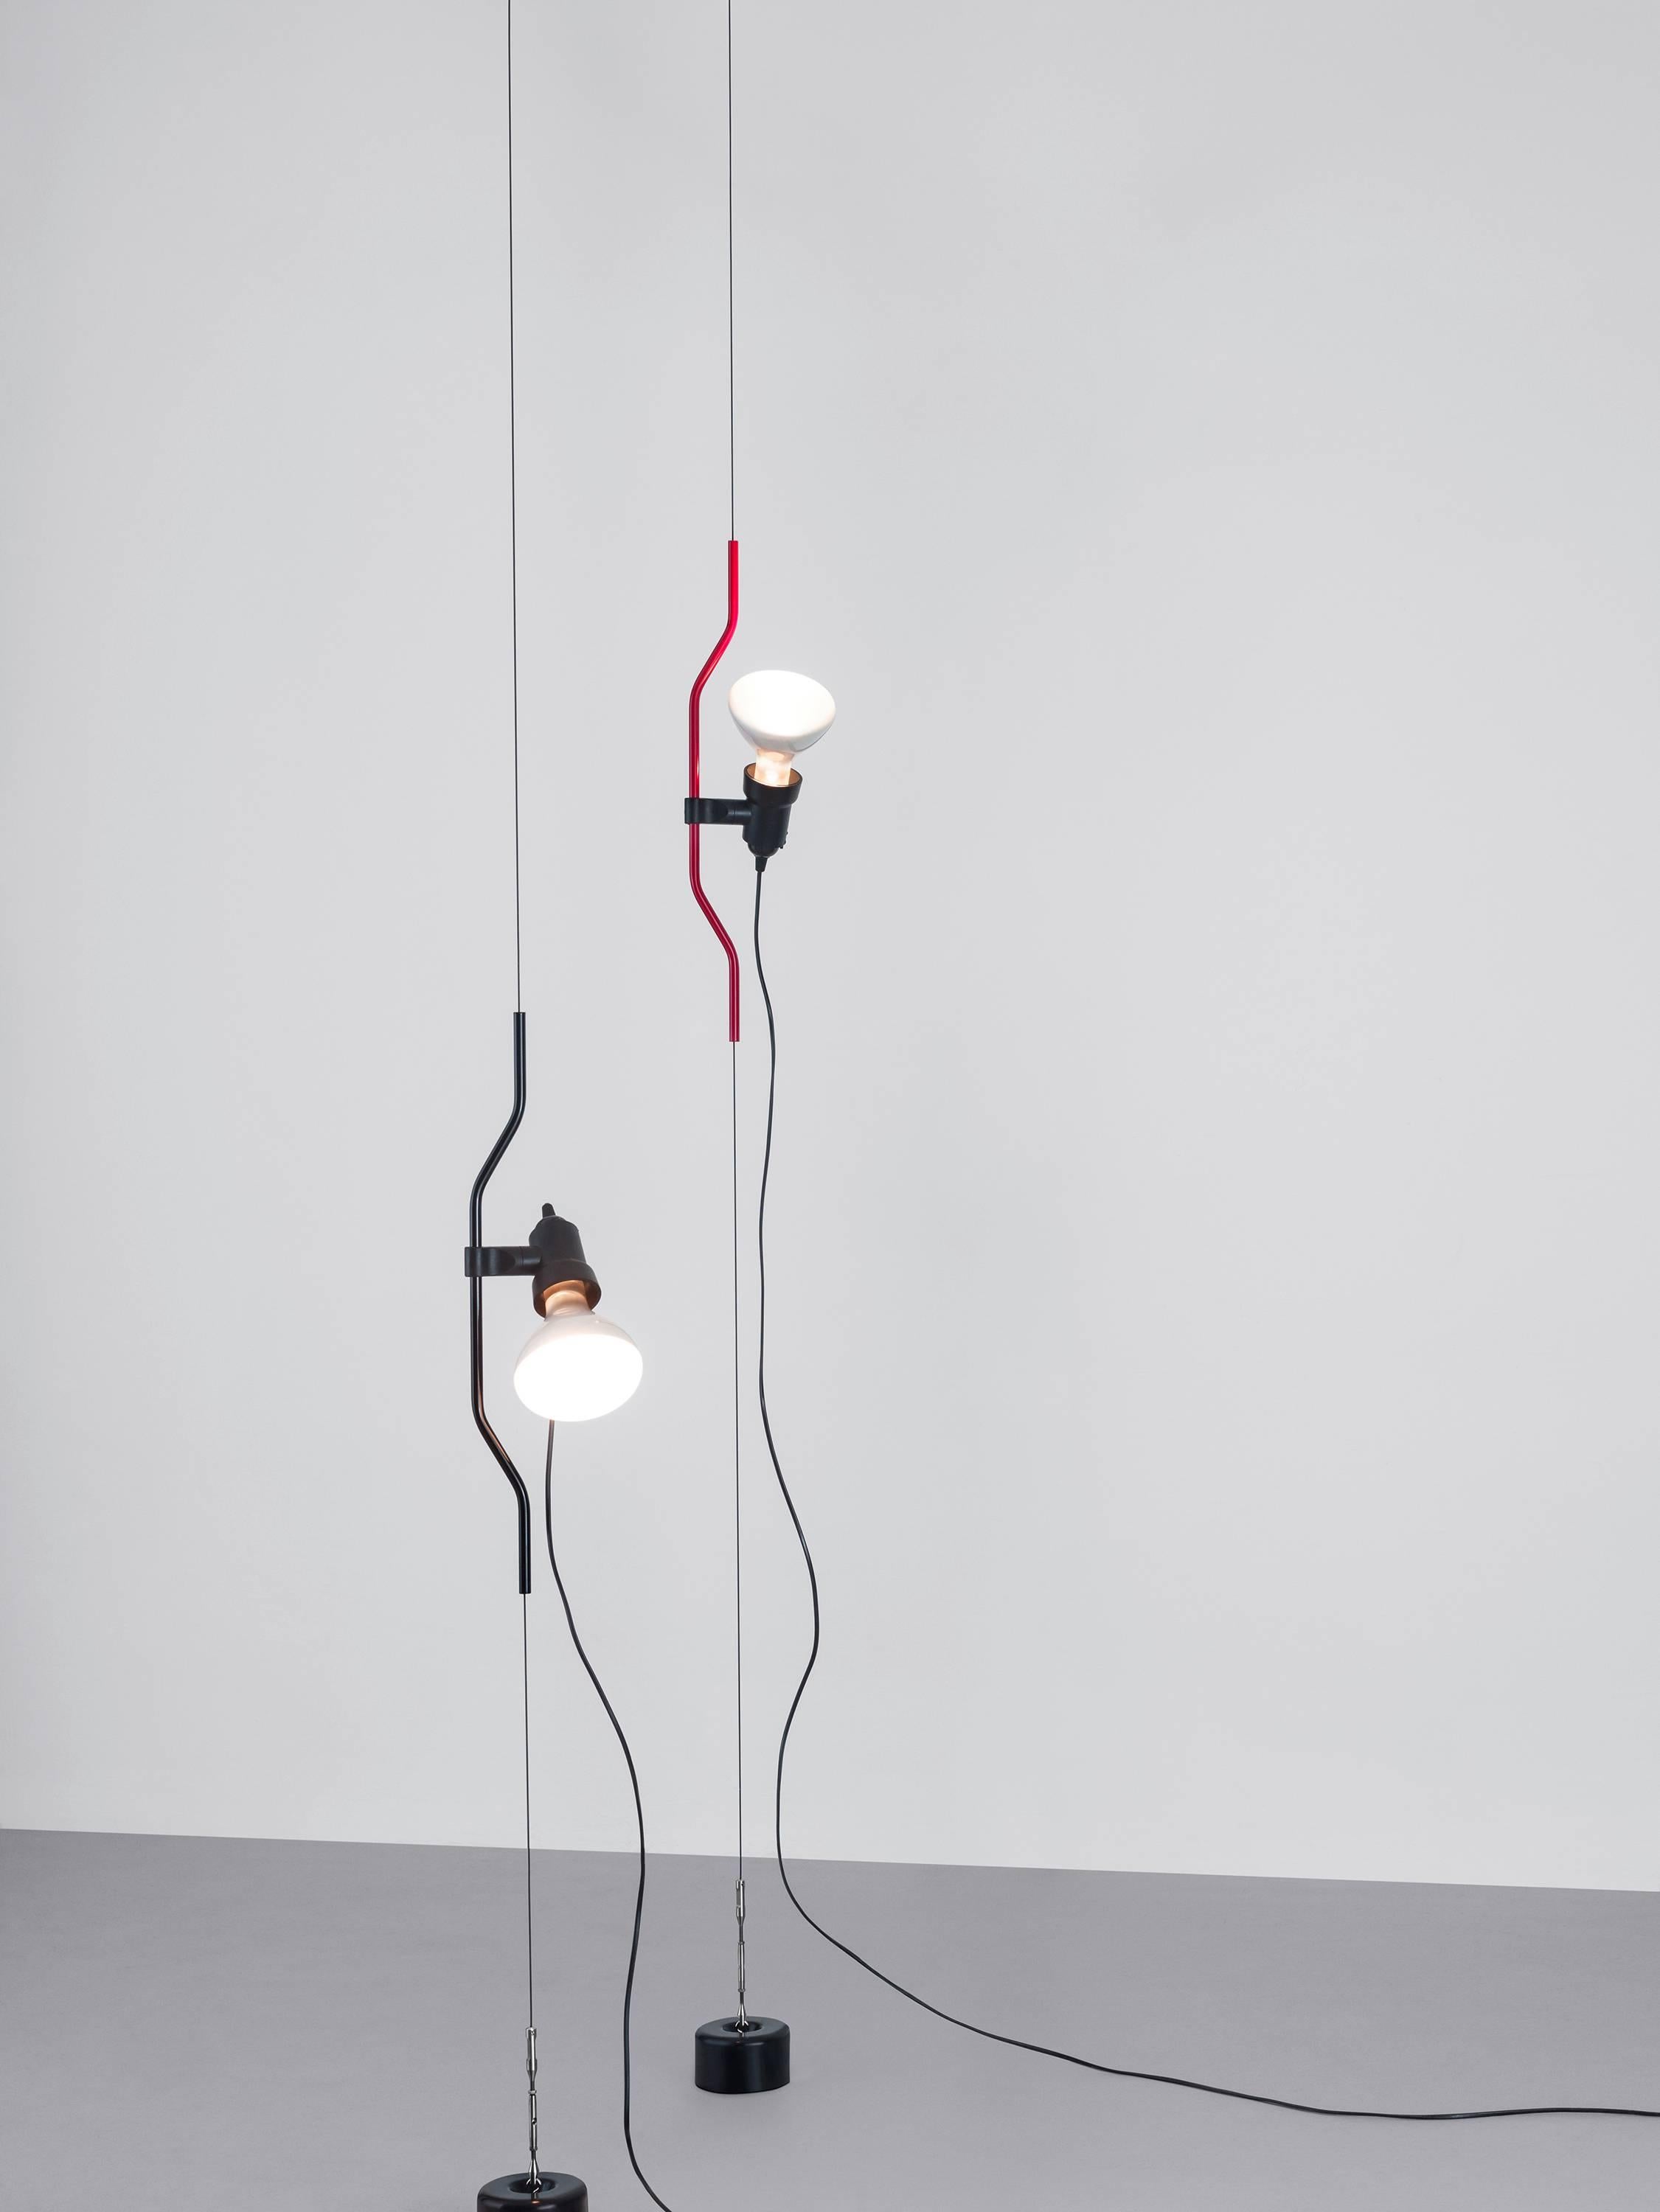 Borne out of a 1971 collaboration between Achille Castiglioni and Pio Manzù, the Parentesi was named for the parenthesis symbol, a visual reference to the nickel-plated shaped tube that lives on a floor-to-ceiling steel cable. The steel cable can